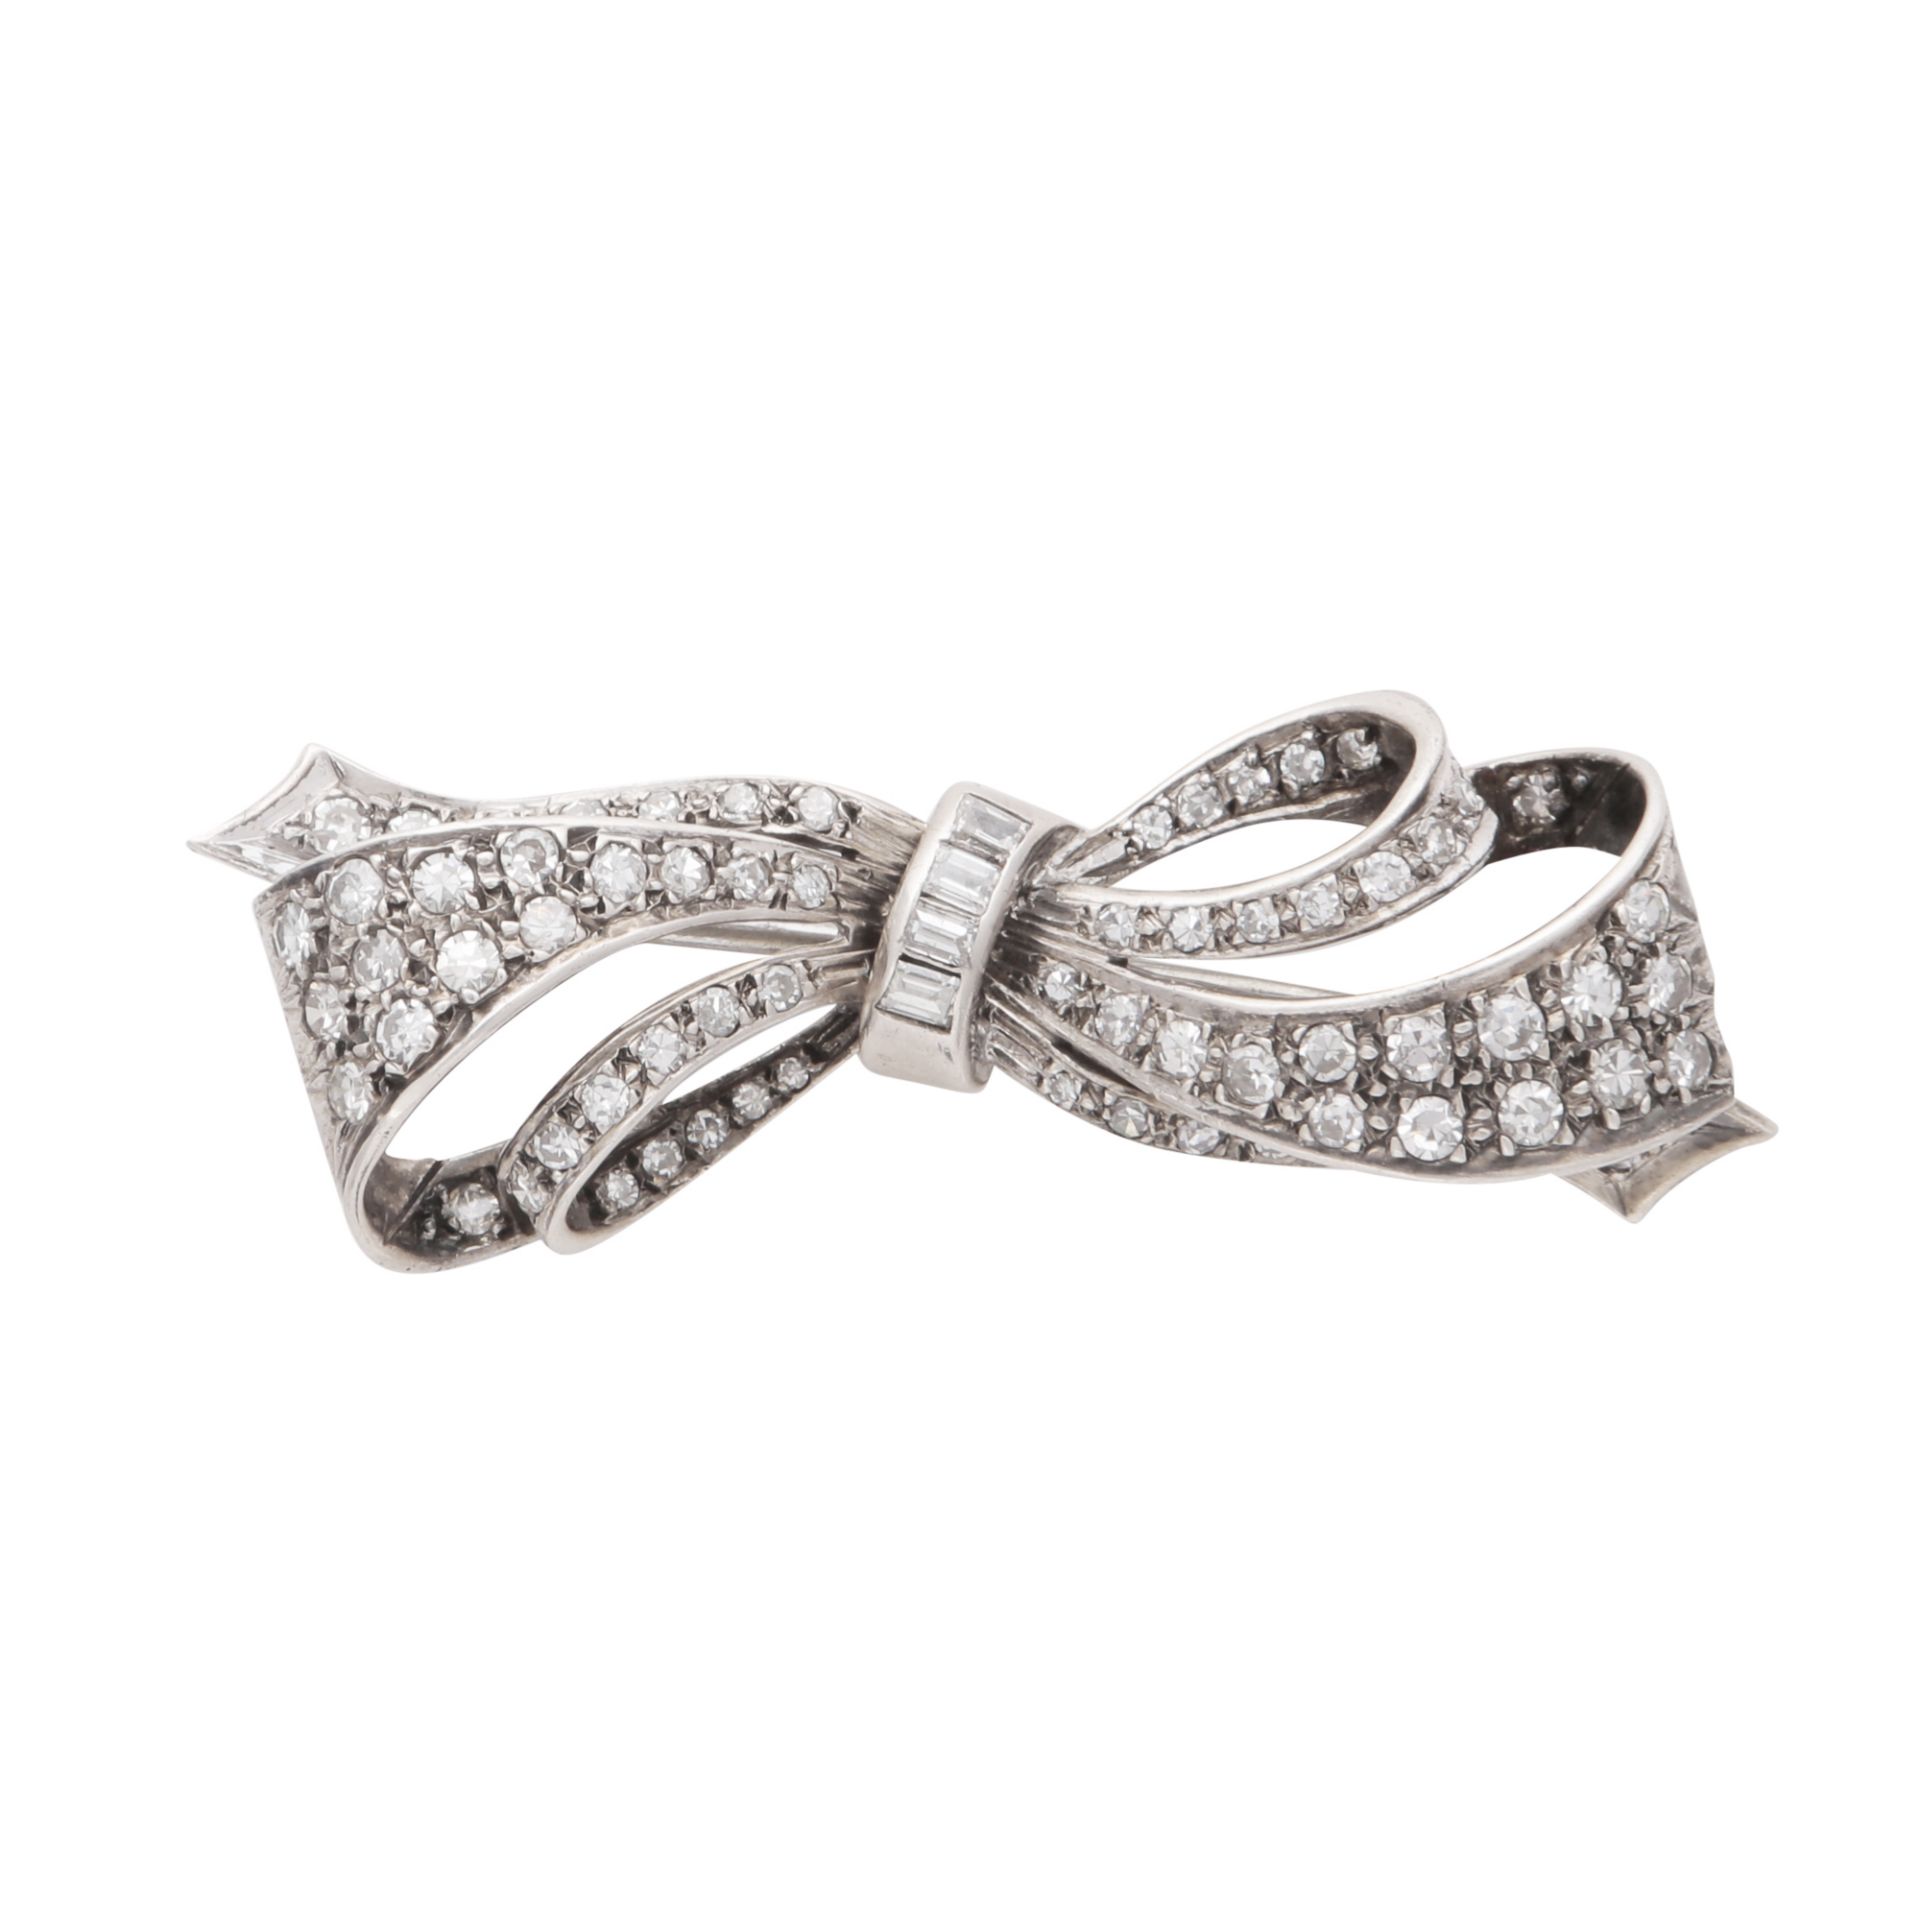 An antique late Victorian diamond bow brooch in platinum, designed as a double tied bow, jewelled